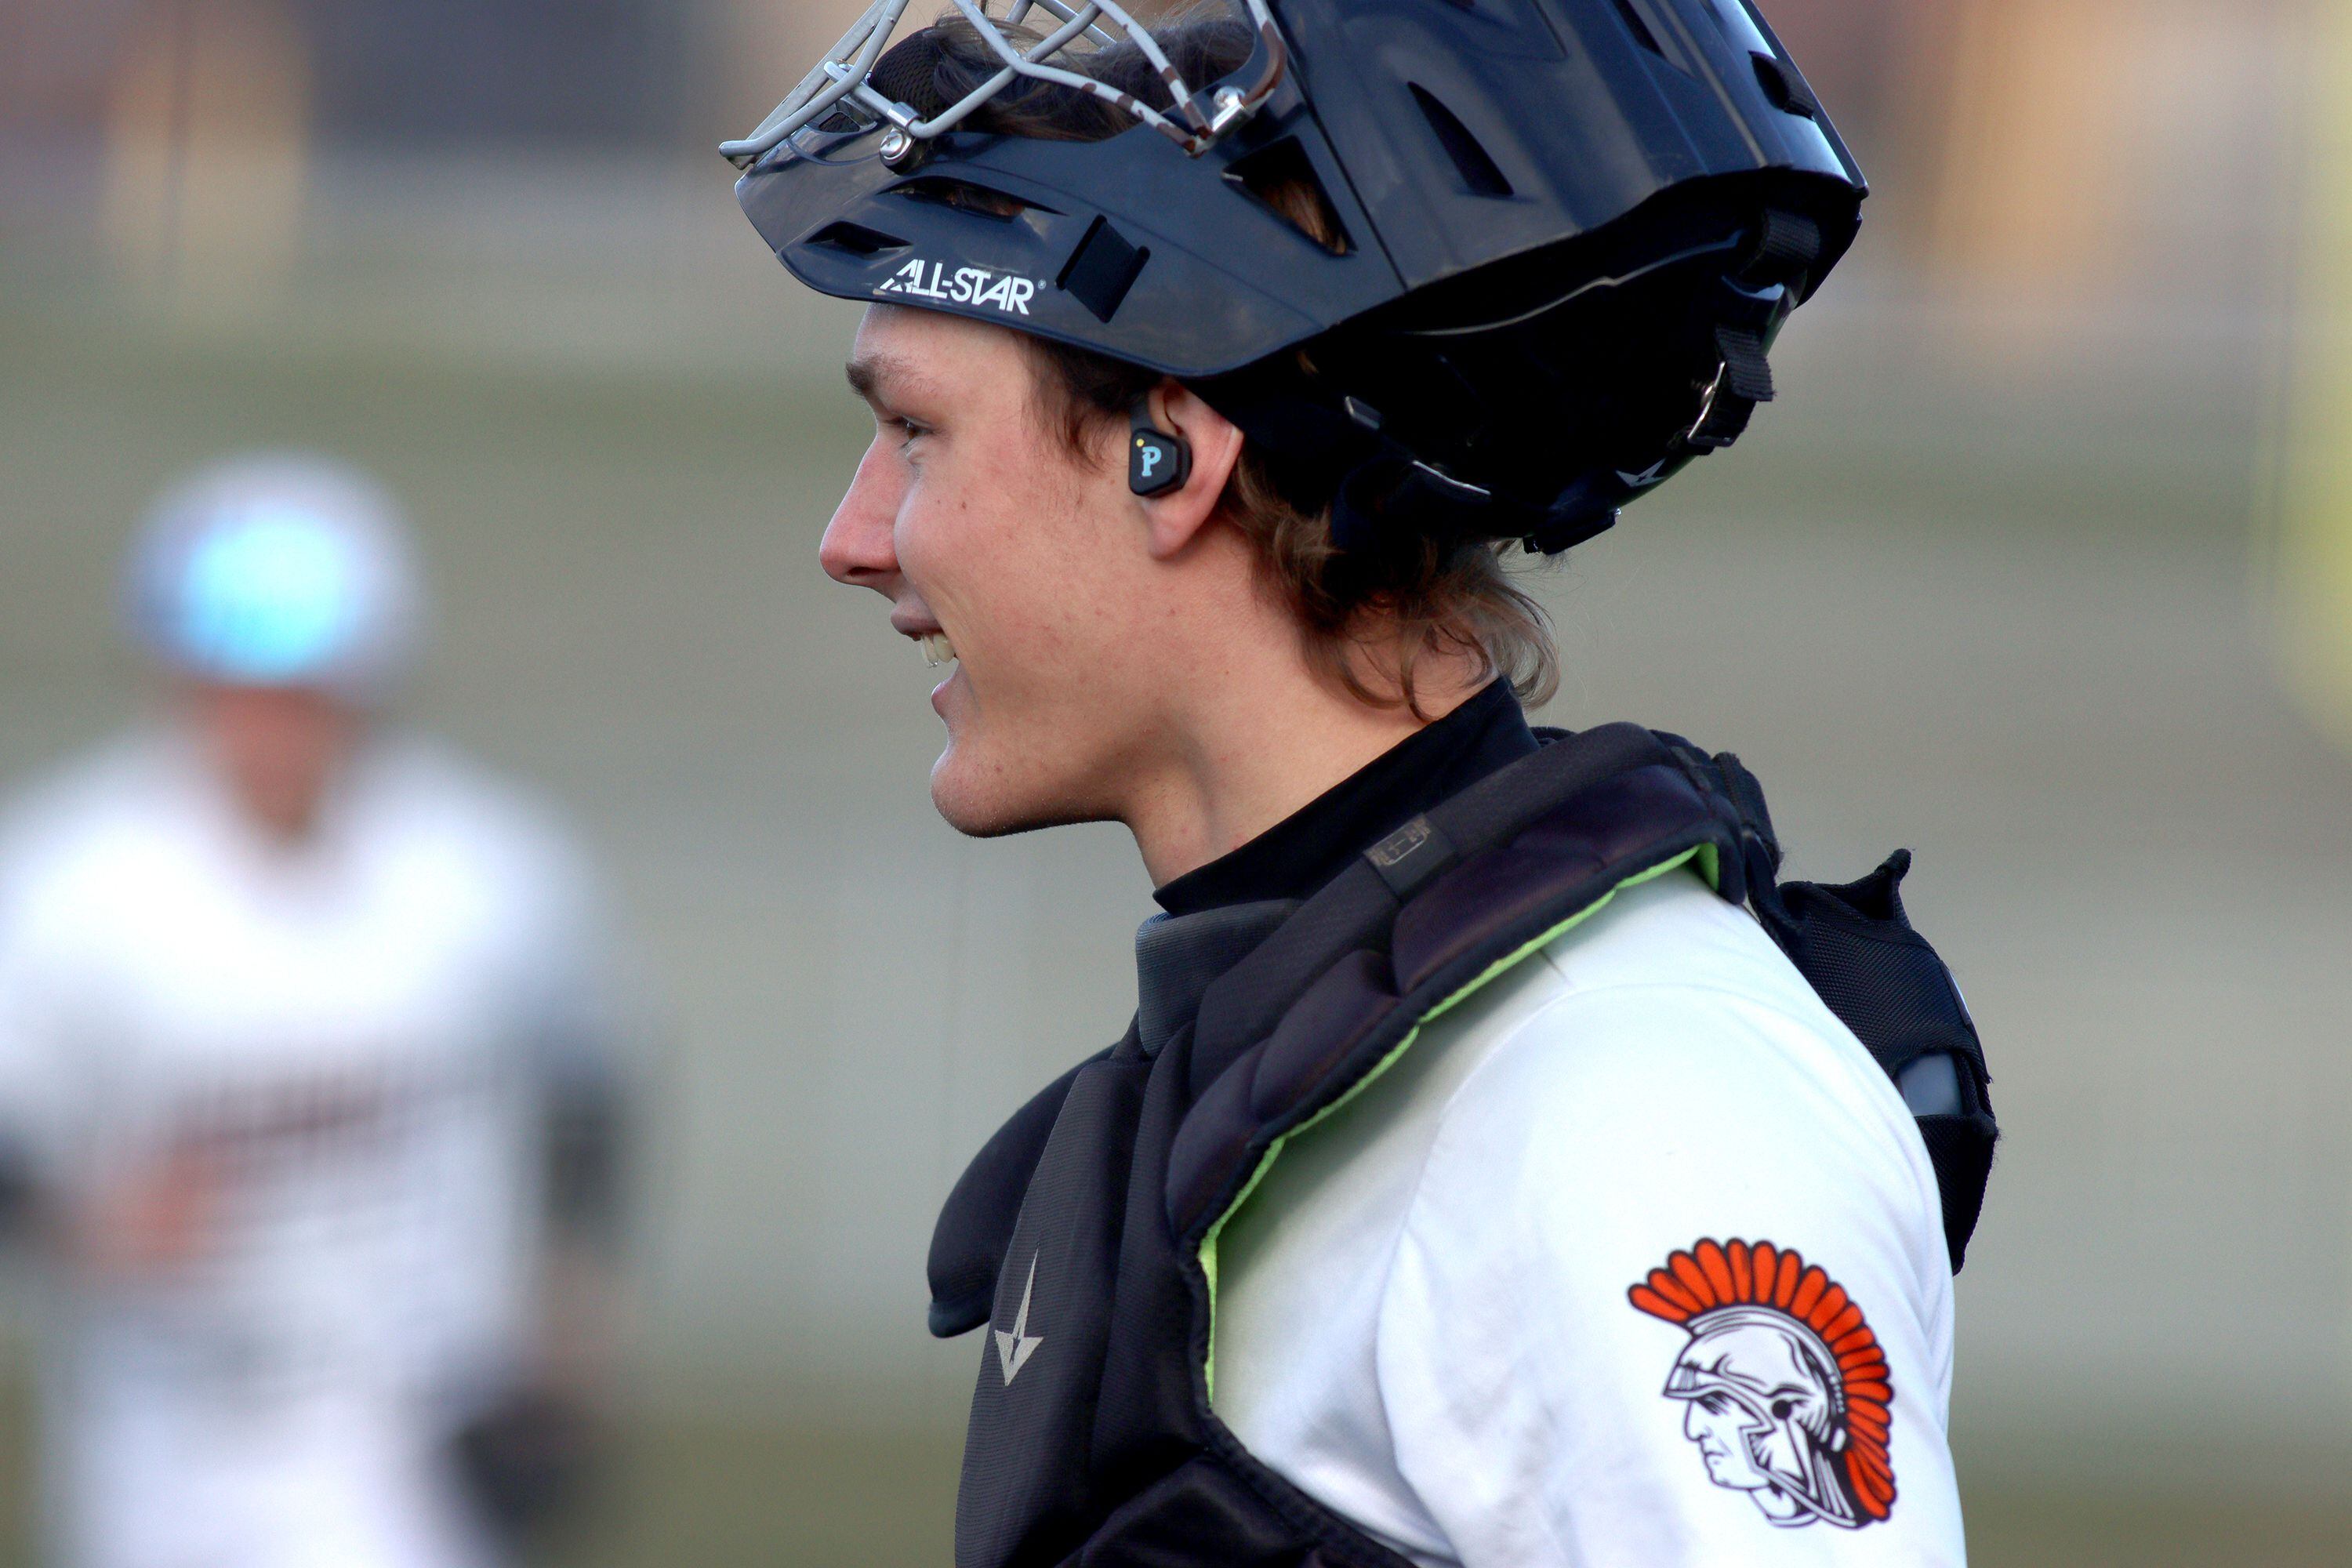 McHenry catcher Kamrin Borck receives pitch calls via earpiece from pitching coach Zach Badgley on April 5 against Huntley.